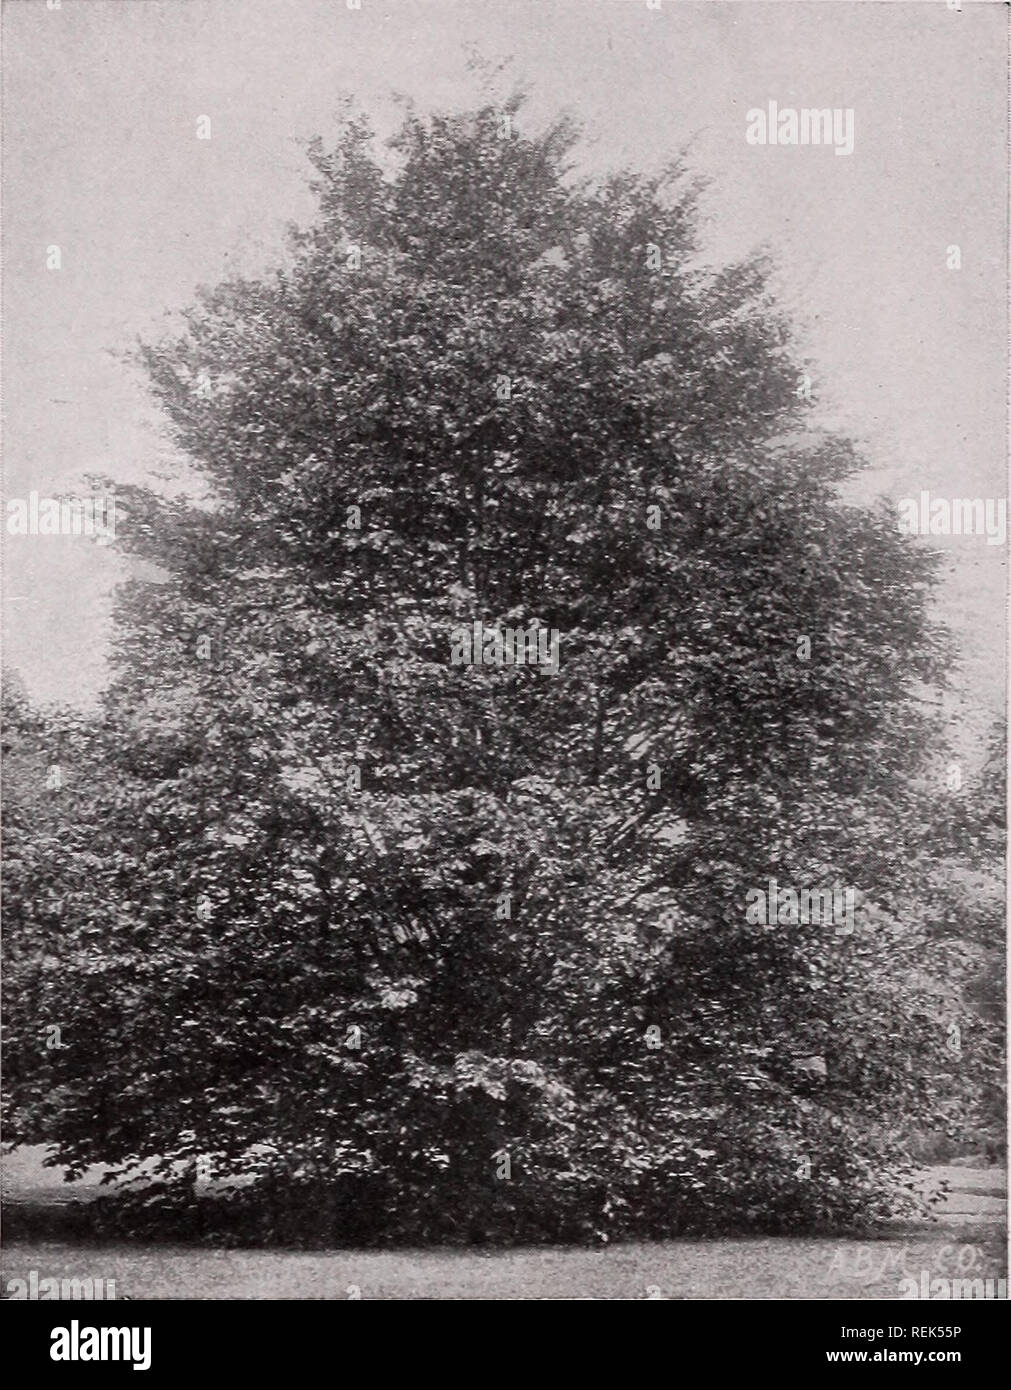 . C. M. Hobbs &amp; Sons. Nurseries Horticulture Catalogs; Evergreens Catalogs; Fruit trees Catalogs; Climbing plants Catalogs; Shrubs Catalogs; Flowers Catalogs; Vegetables Catalogs. 30 C. M. HOBBS &amp; SONS, BRIDGEPORT, INDIANA Upright Deciduous Trees AILANTHUS - Tree of Heaven A. Glandulosa—From Japan. A lofty, rapidly growing tree, with long elegant, feathery foliage, free from all diseases and insects. One of the most distinct of ornamental trees. ASH - Fraxinus American White Ash &lt; F. Americana)-— A well known native tree; tall, very straight, with broad, round head and dense foliage Stock Photo